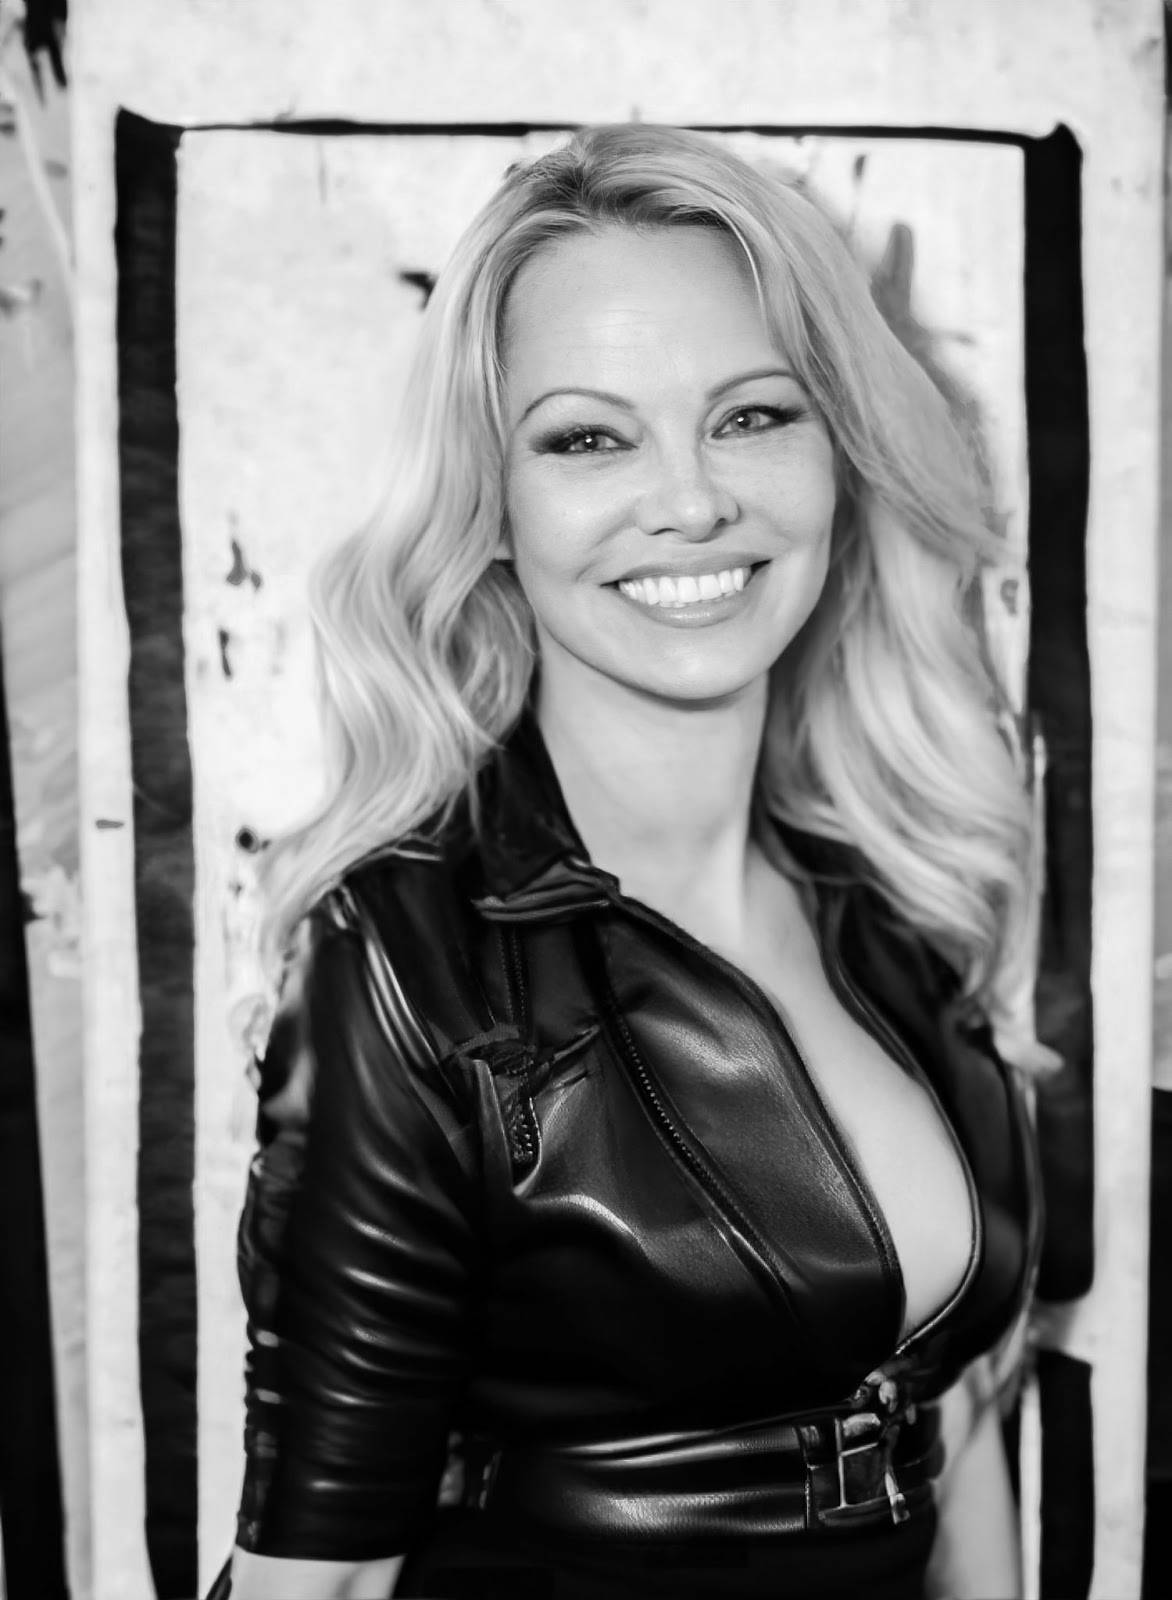 This portrait of Pamela Anderson was taken by the M11 and a 50mm, 1.4 lens.